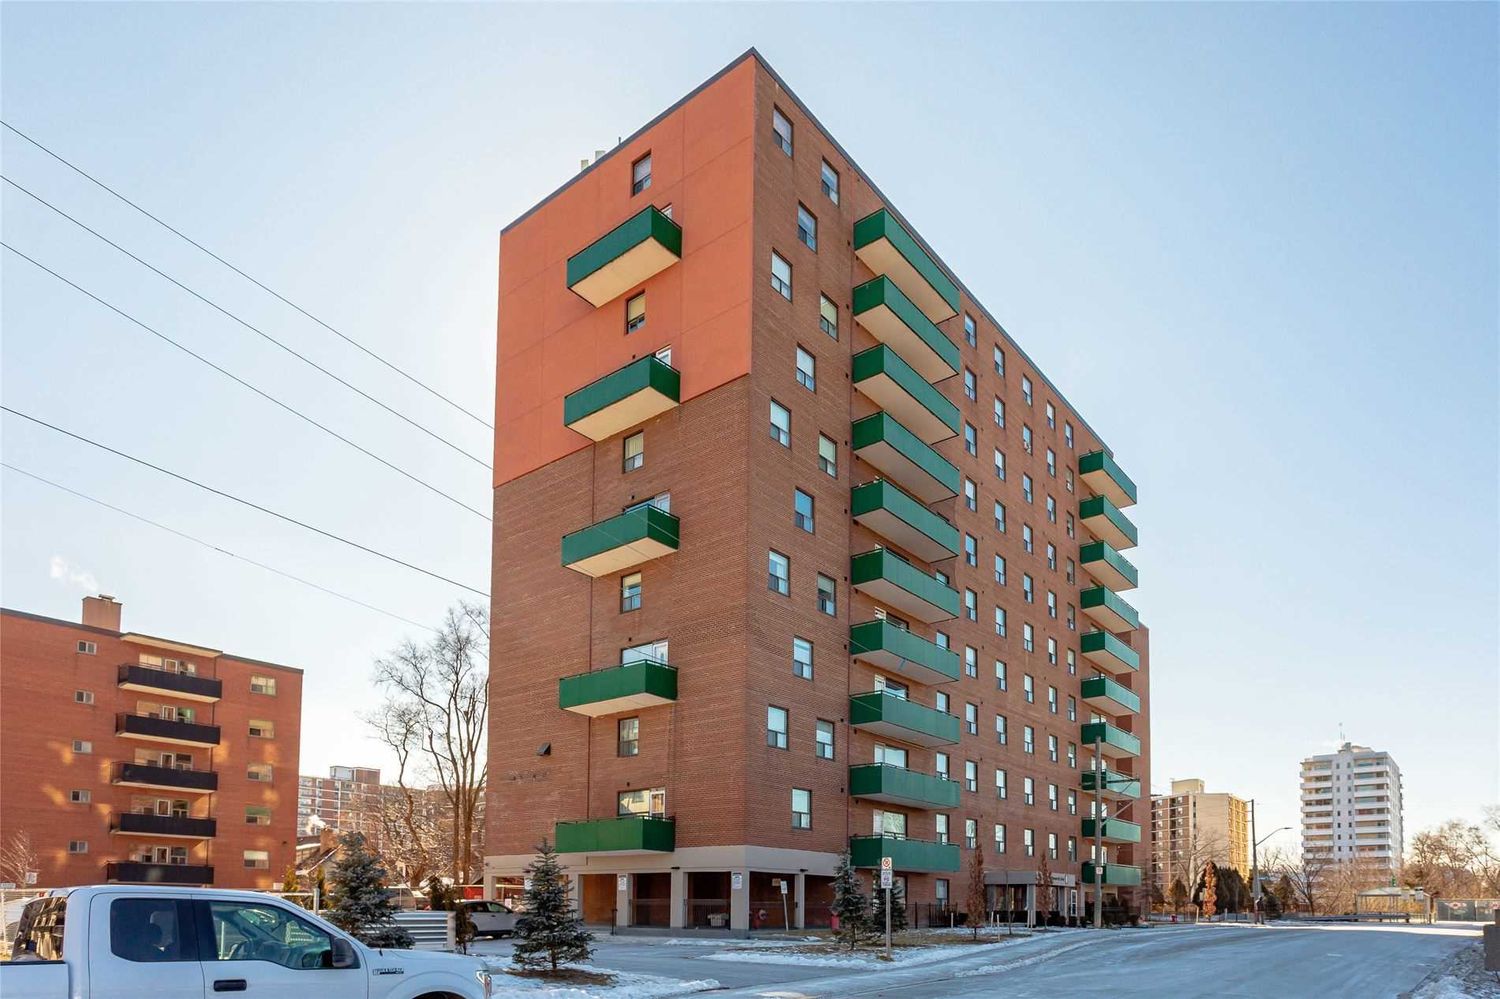 49 Queen Street E. 49 Queen Condos is located in  Mississauga, Toronto - image #1 of 2